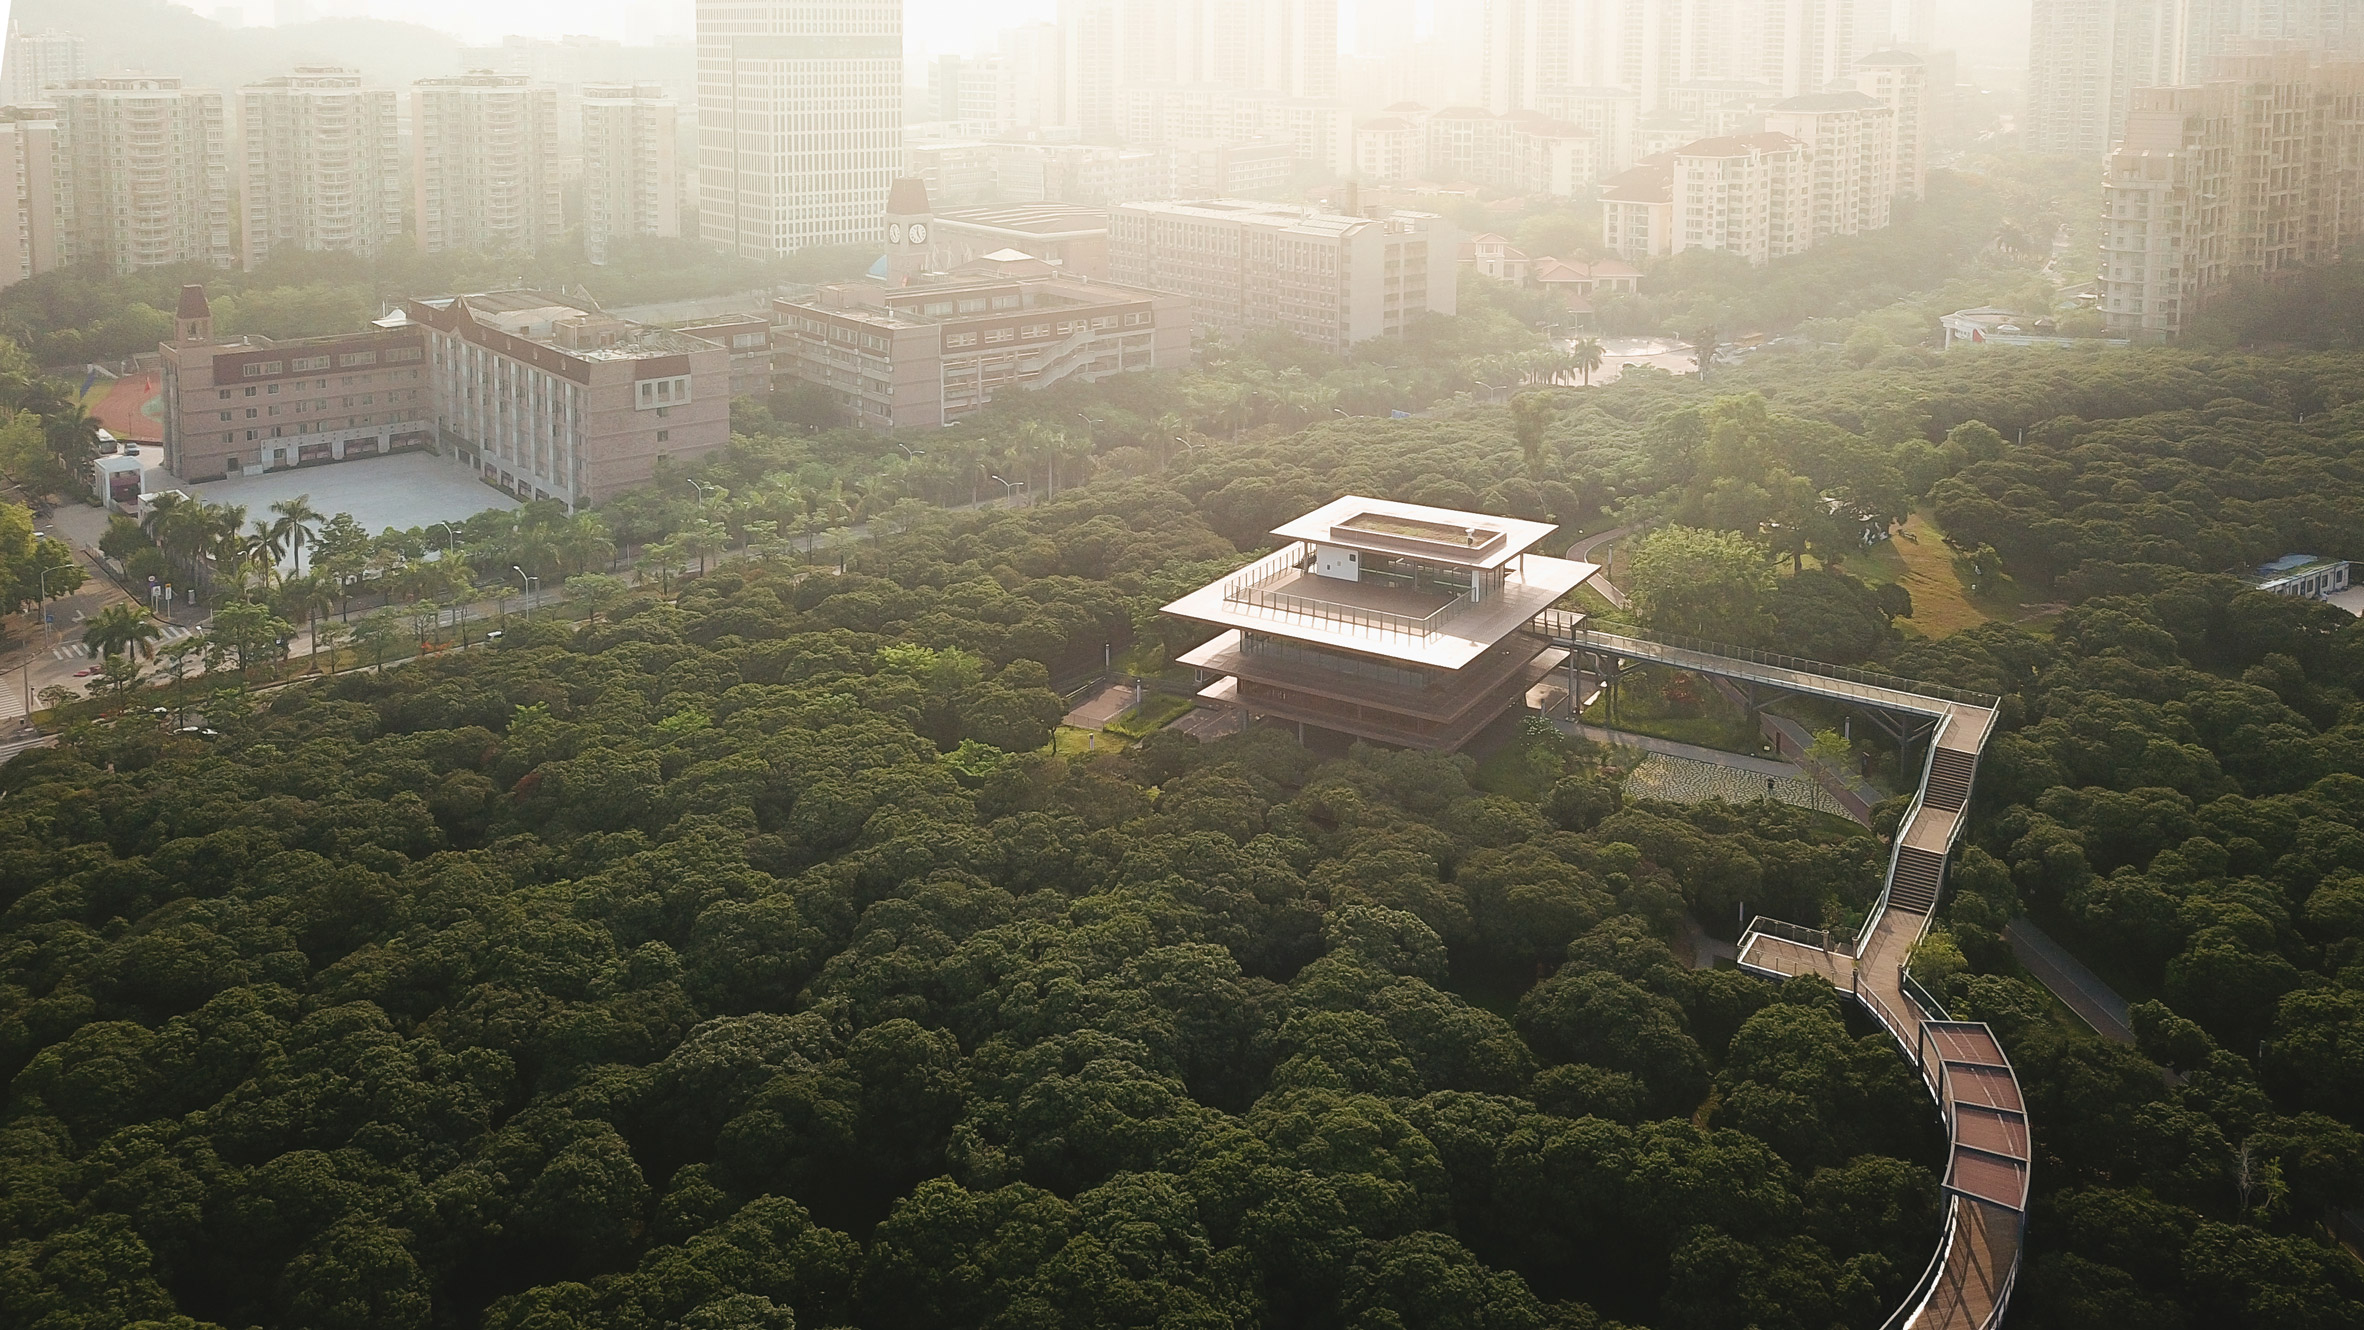 Xiangmi Science Library connected to park by glazed walkway through treetops